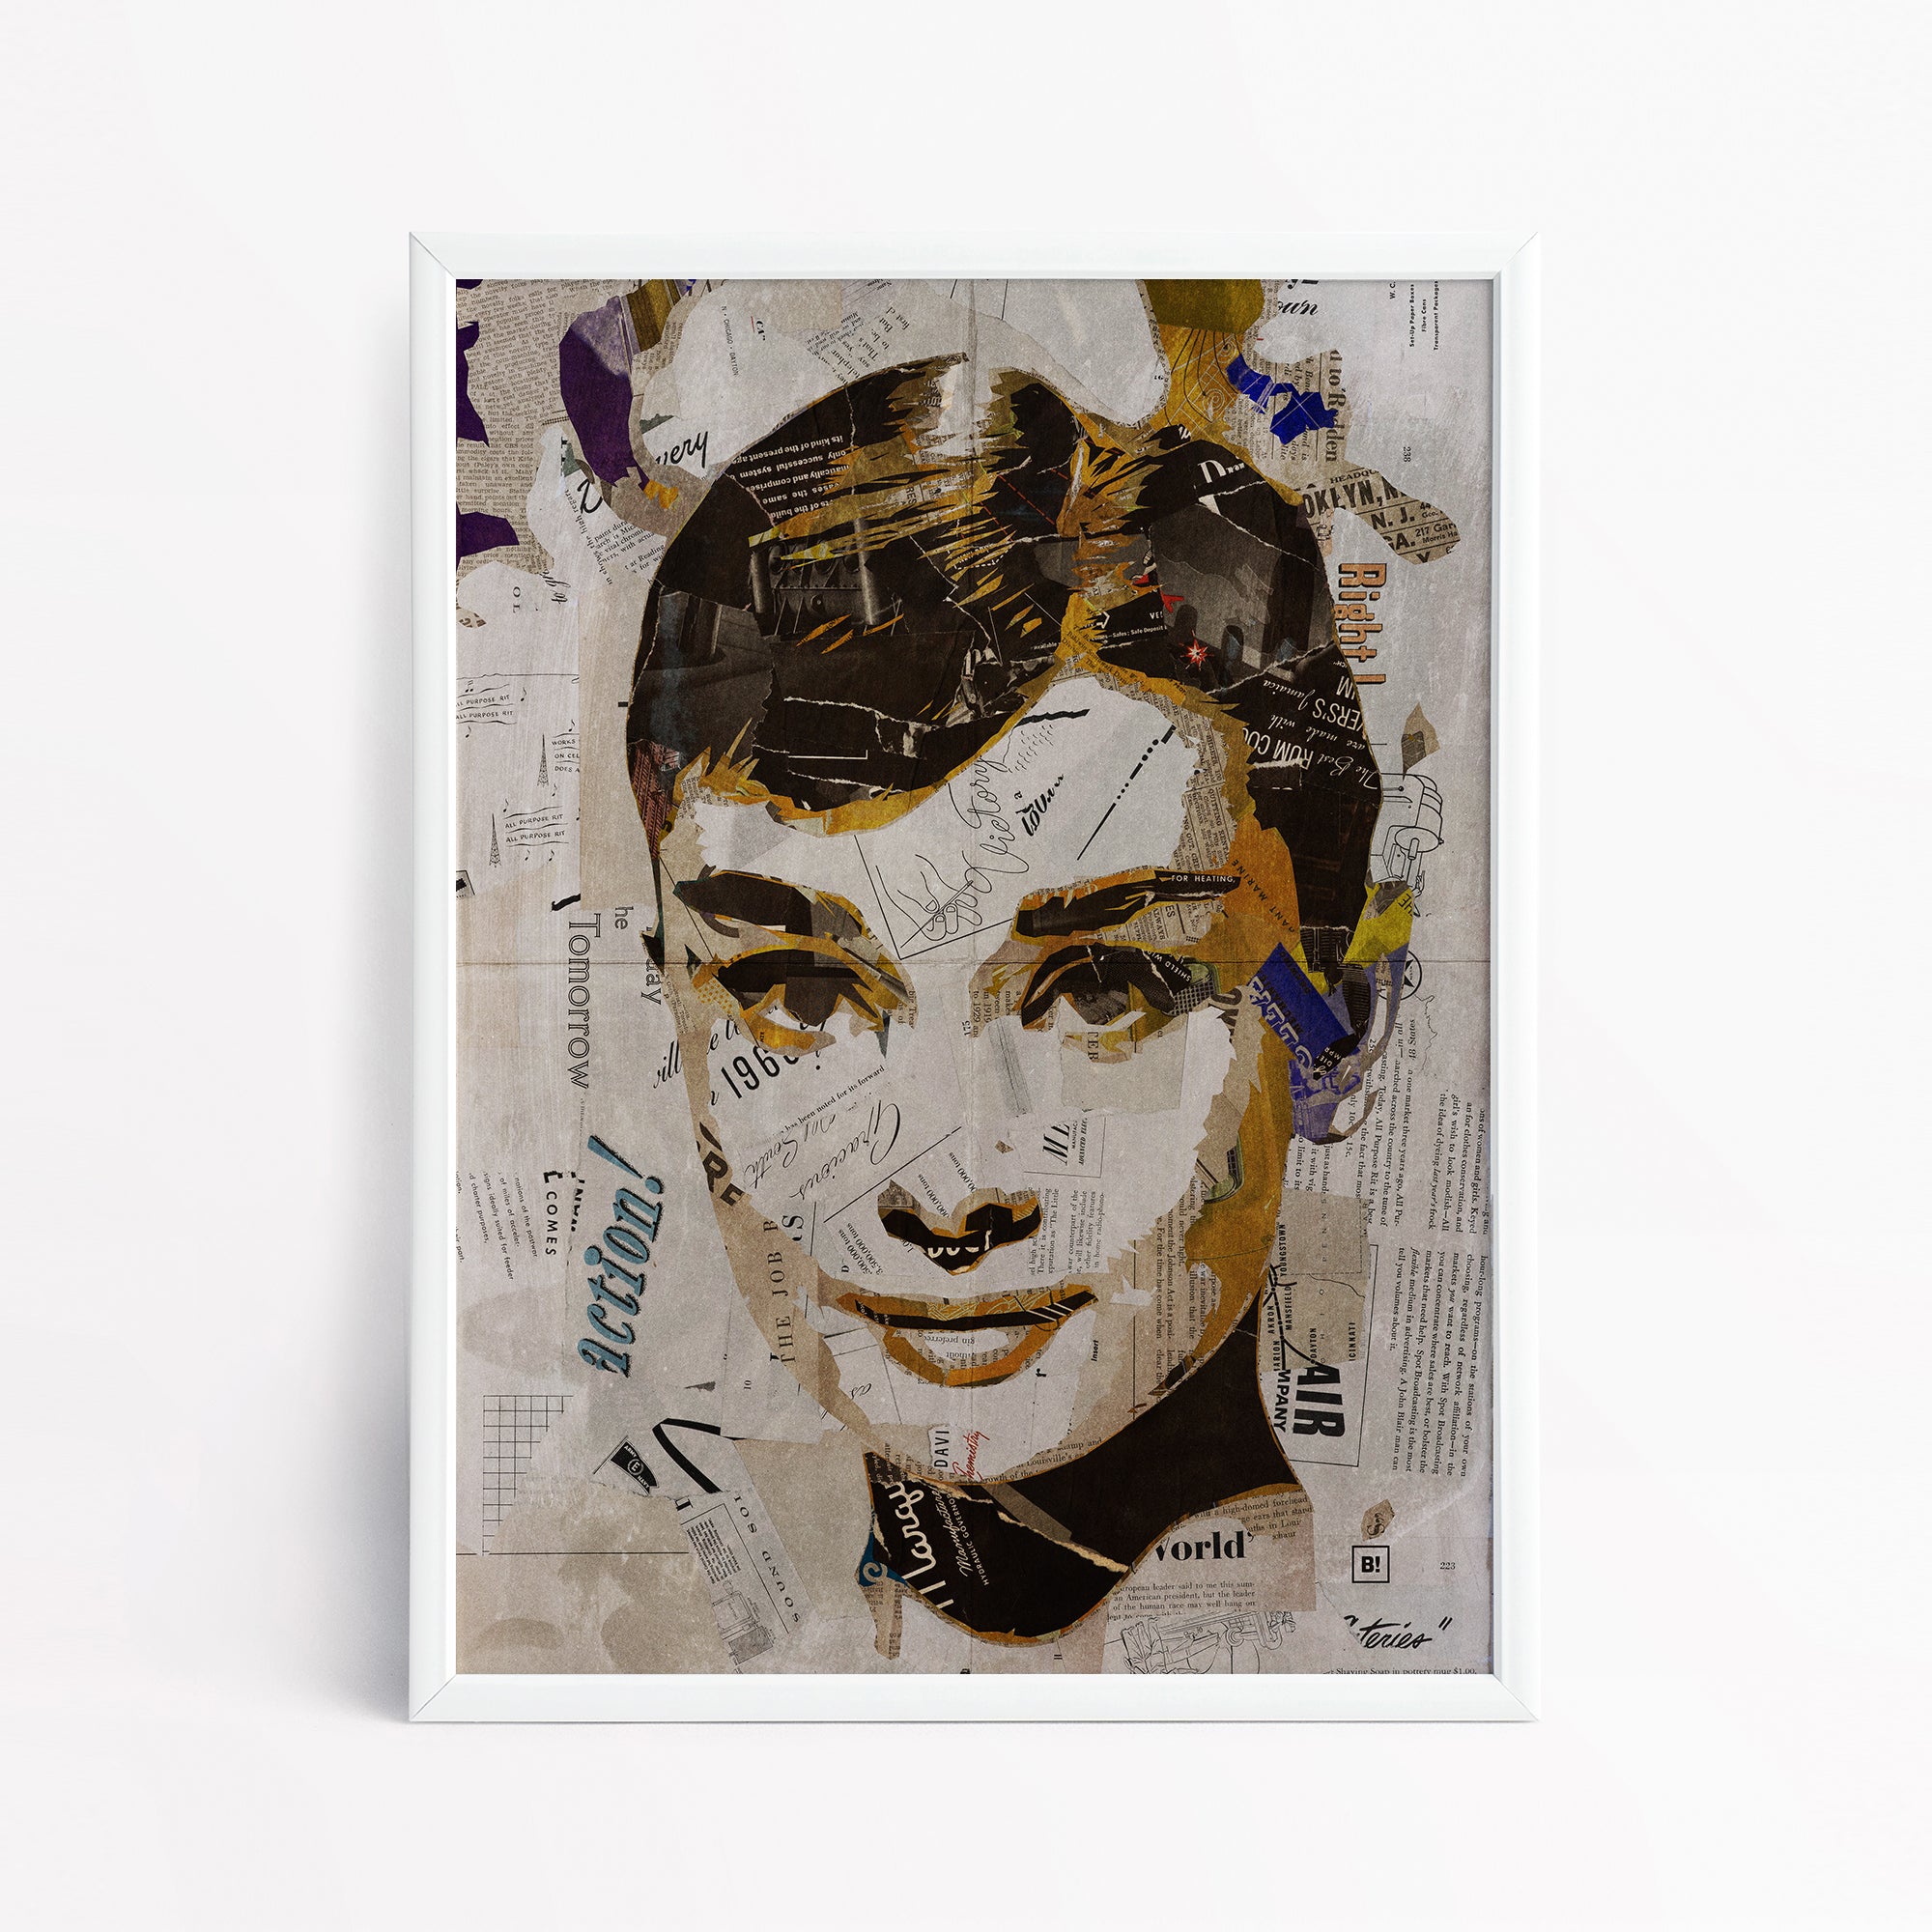 Be inspired by our iconic collage portrait art print of Audrey Hepburn. This artwork has been printed using the giclée process on archival acid-free paper and is presented in a sleek white frame, showcasing its timeless beauty in every detail.